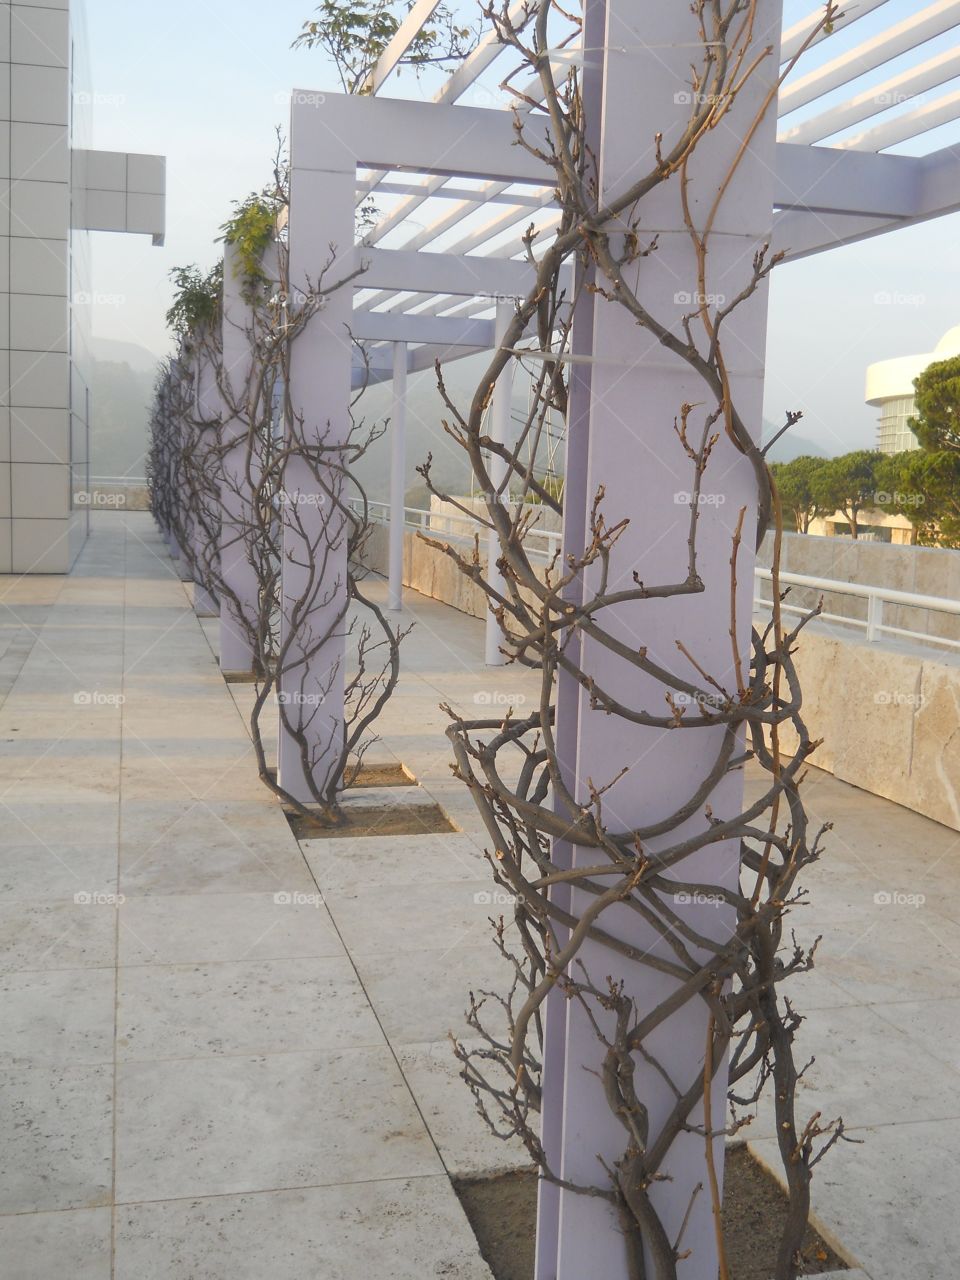 Getty Vines. Vines at the Getty center